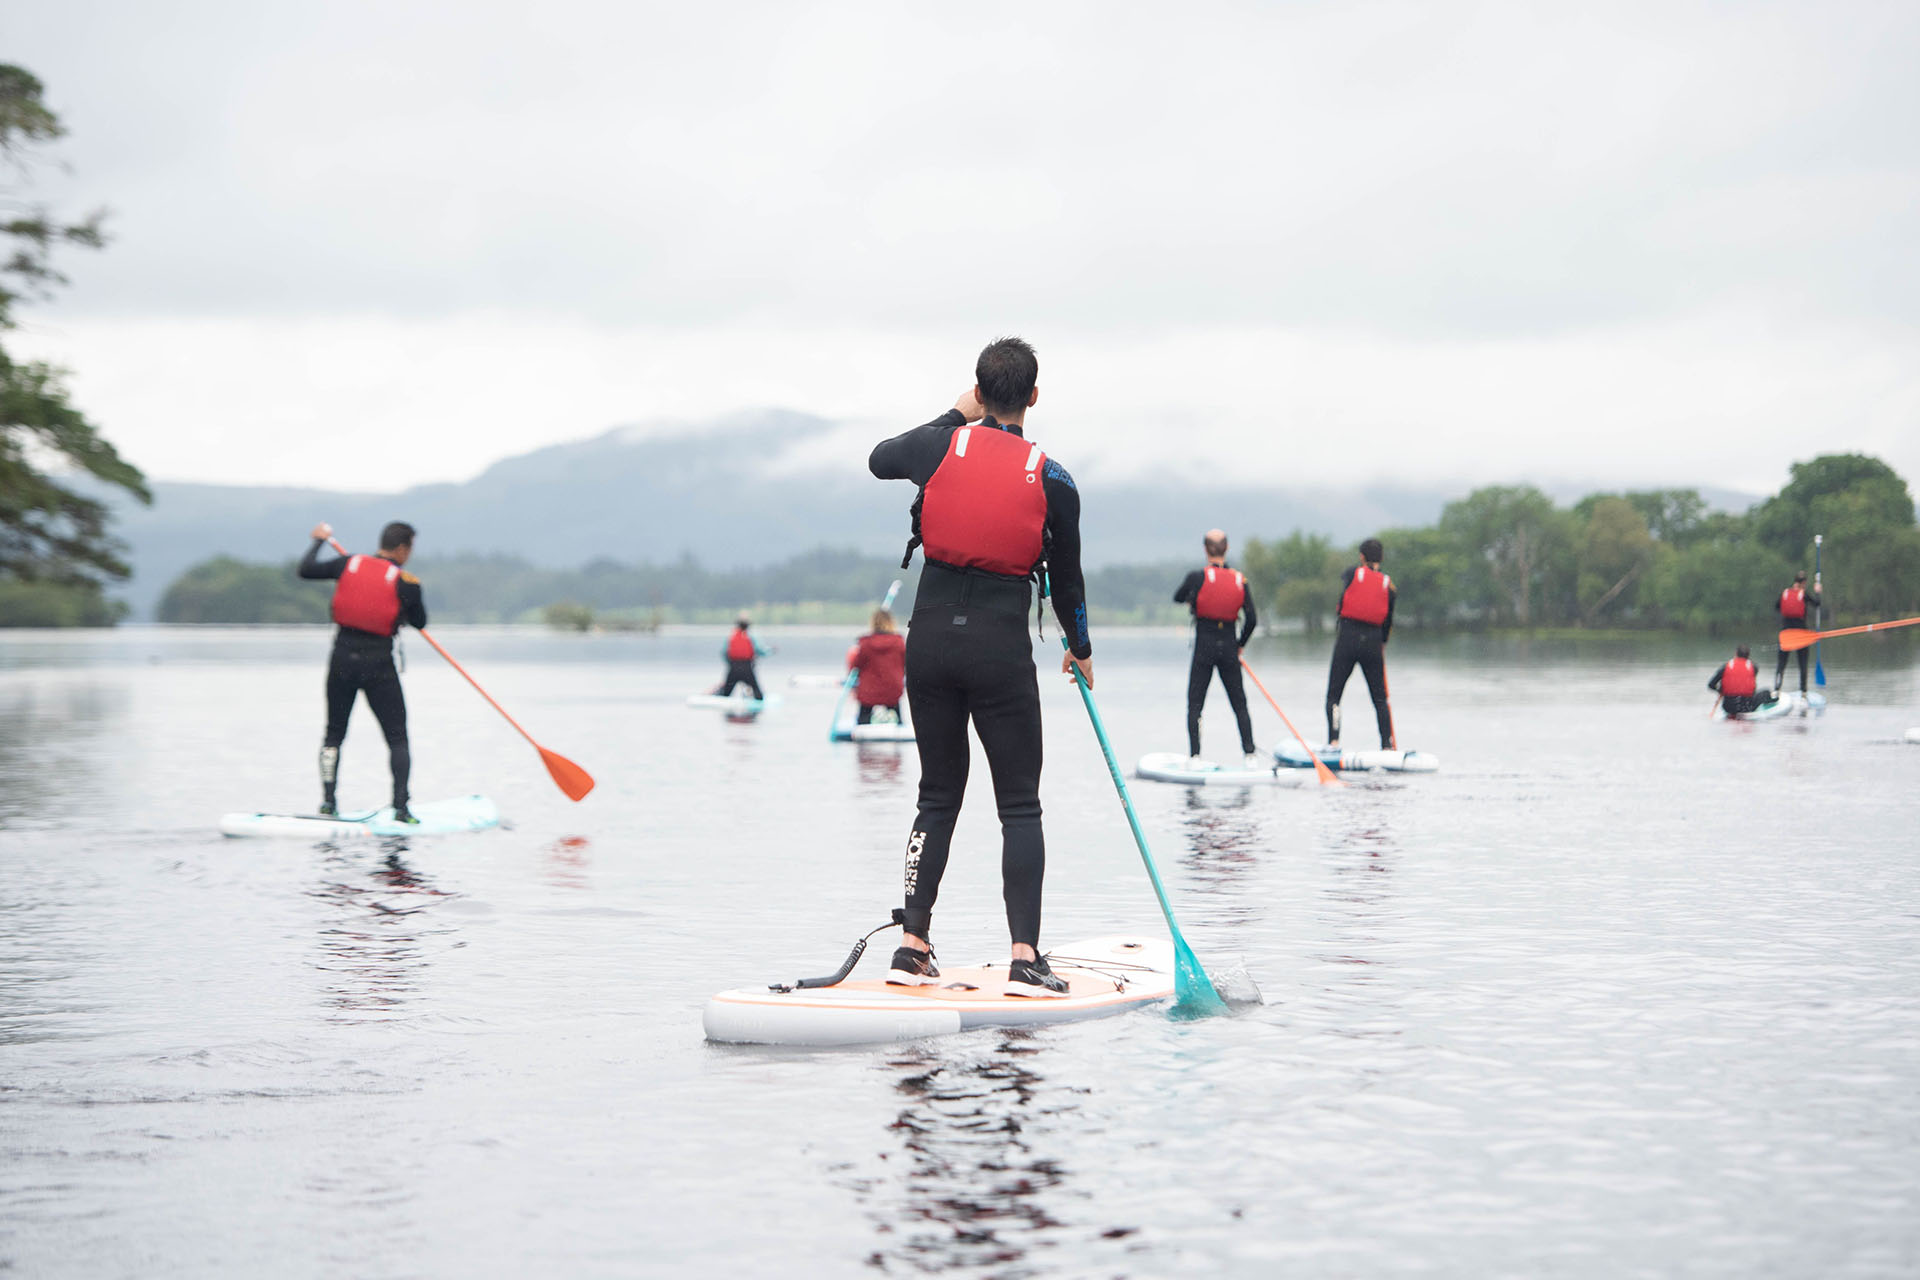 A Group of people on a Guided Paddle board Tour on Loch Lomond